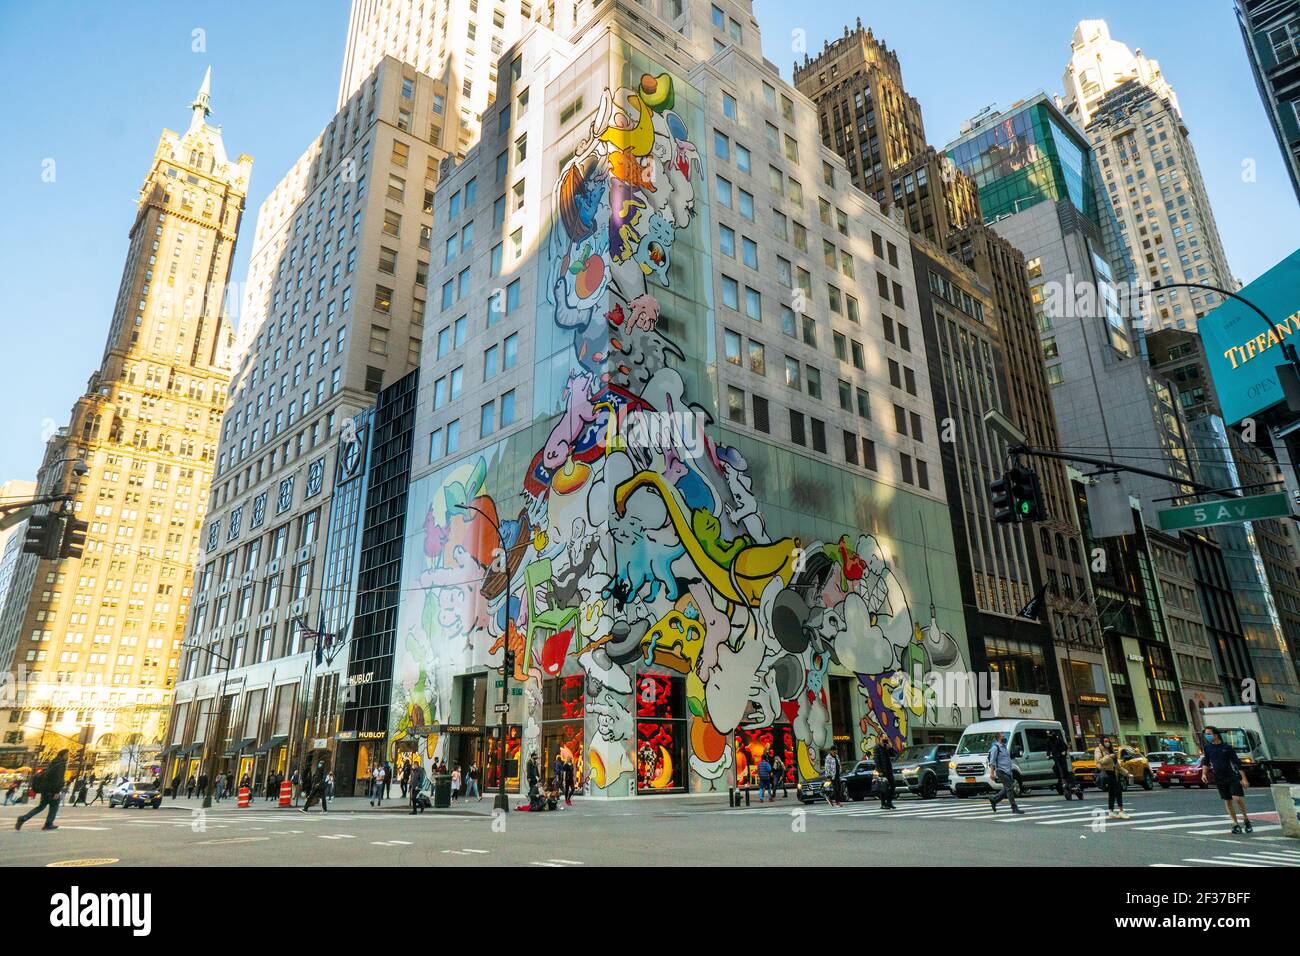 Louis Vuitton Store on Fifth Avenue in New York City, USA Stock Photo -  Alamy